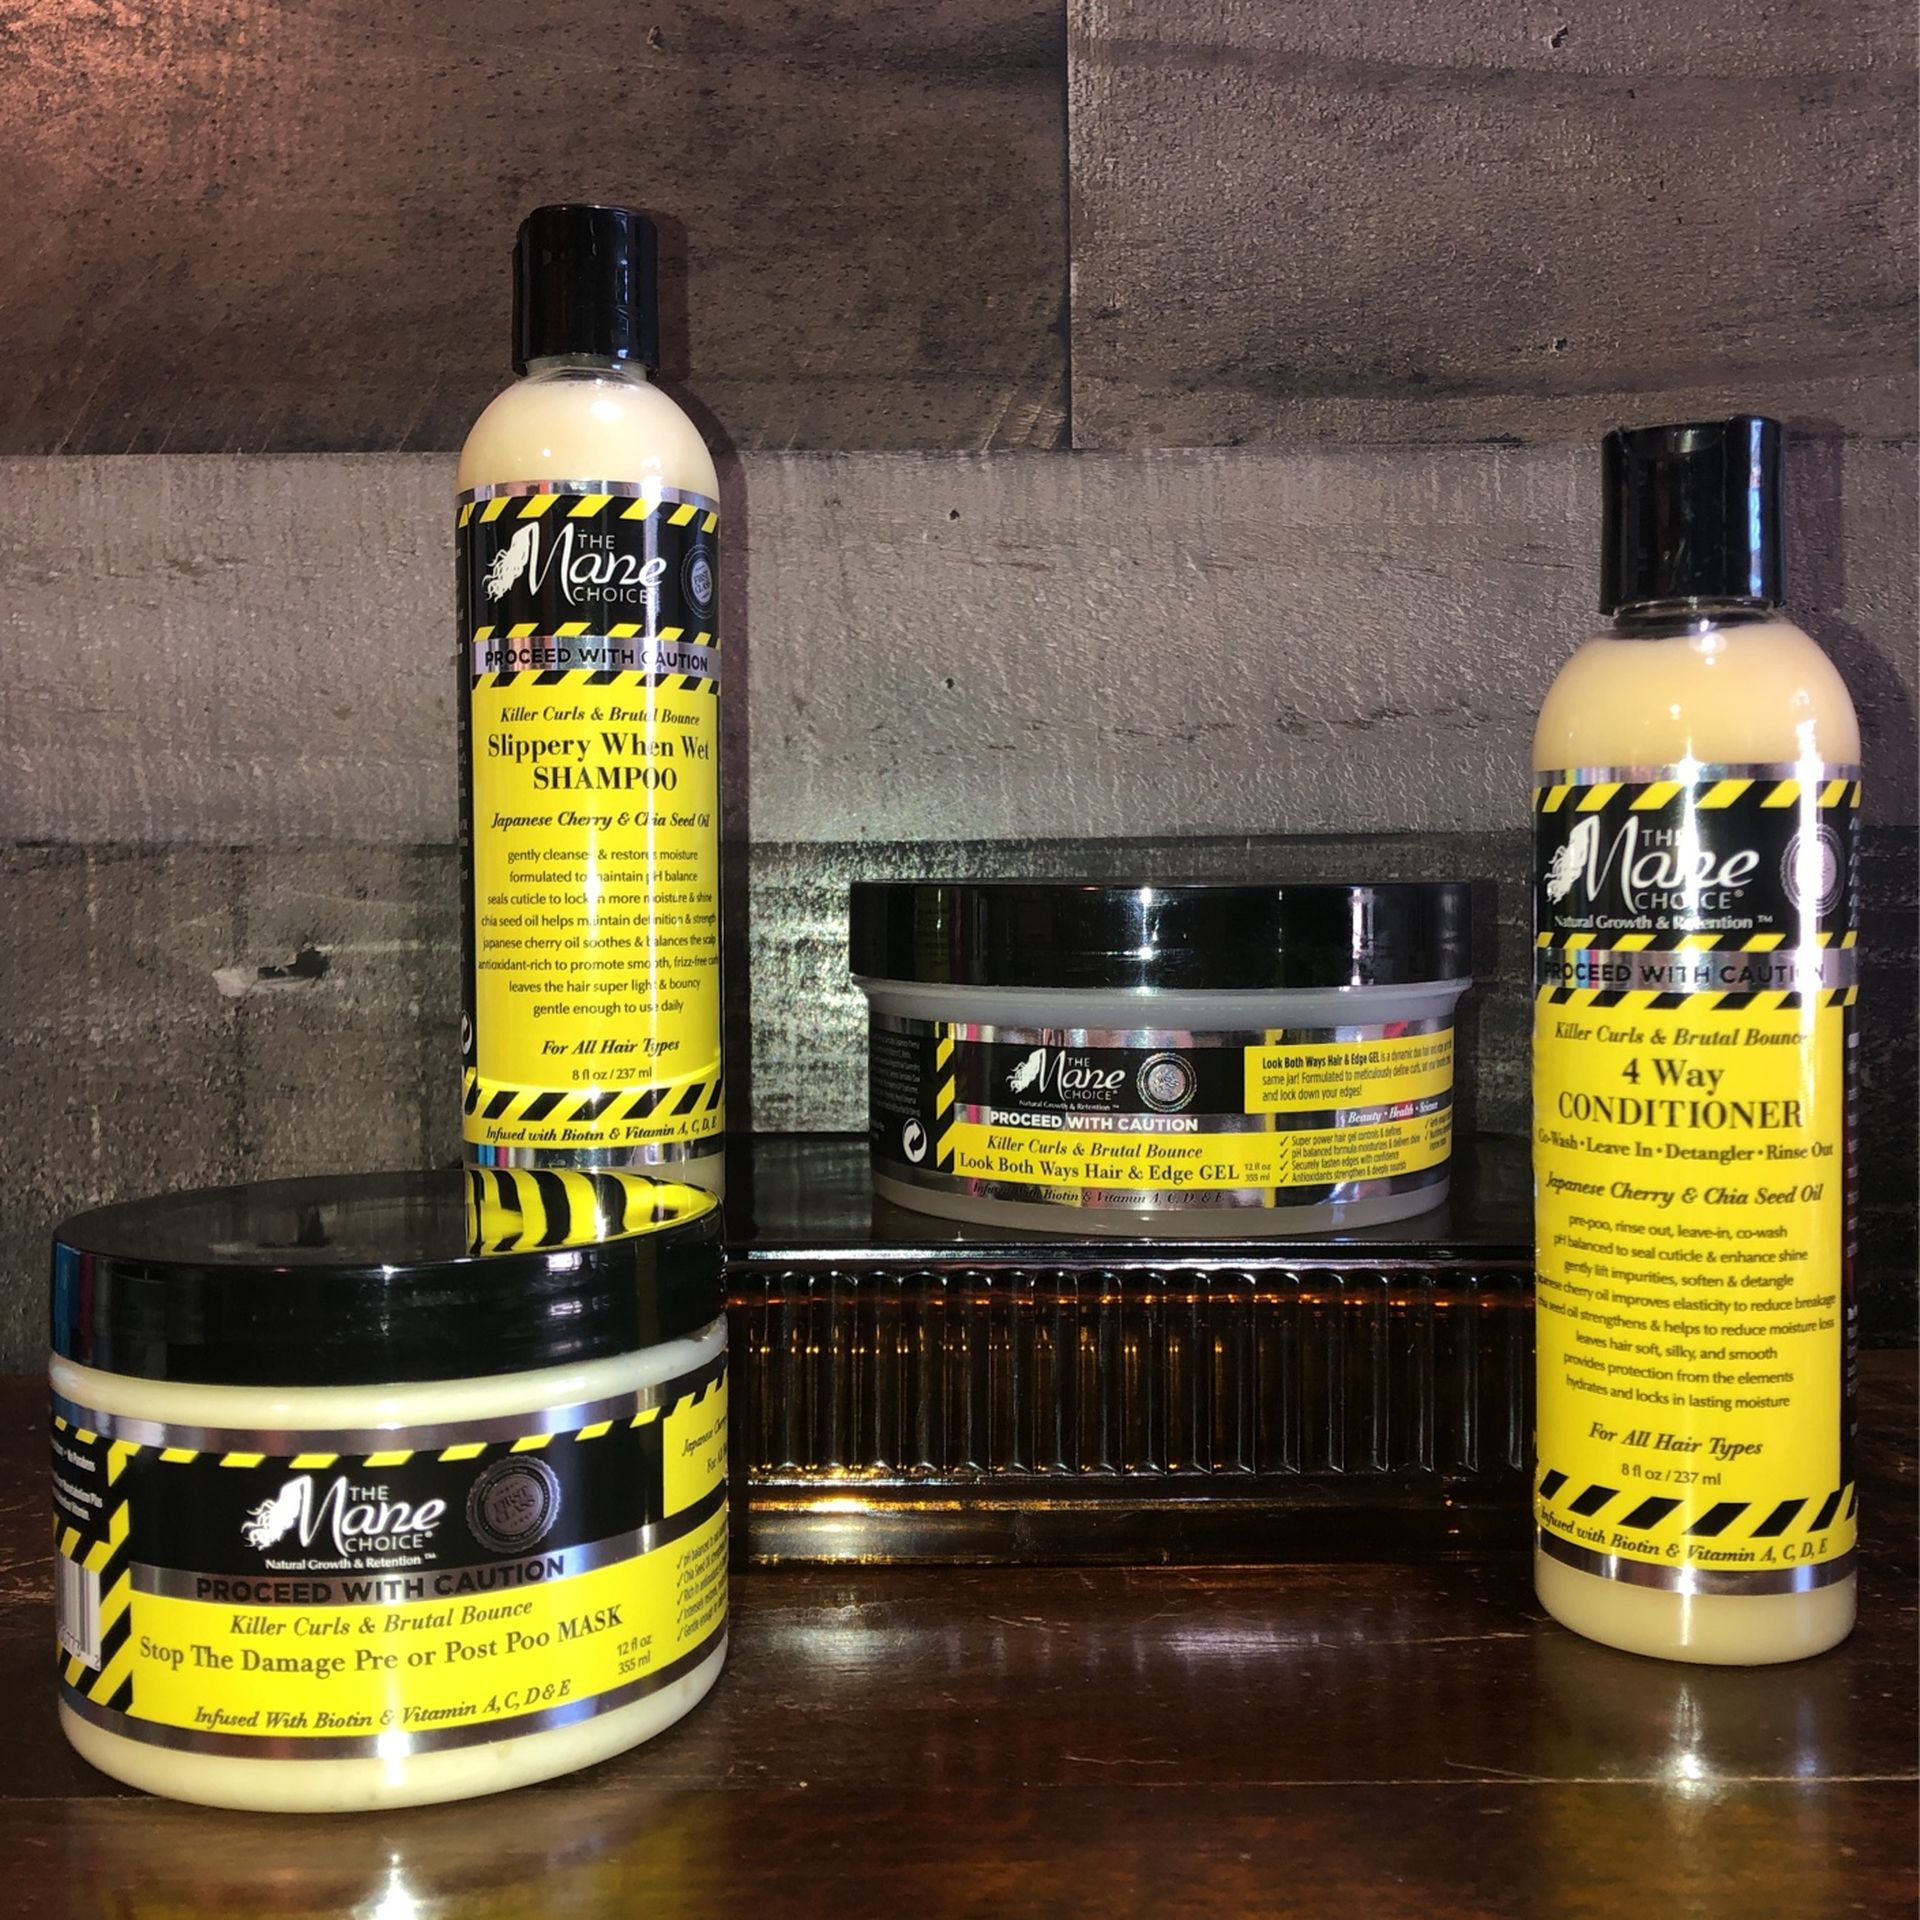 Brand New! 🔲   The Mane Choice Hair Care - Proceed With Caution (((PENDING PICK UP TODAY)))